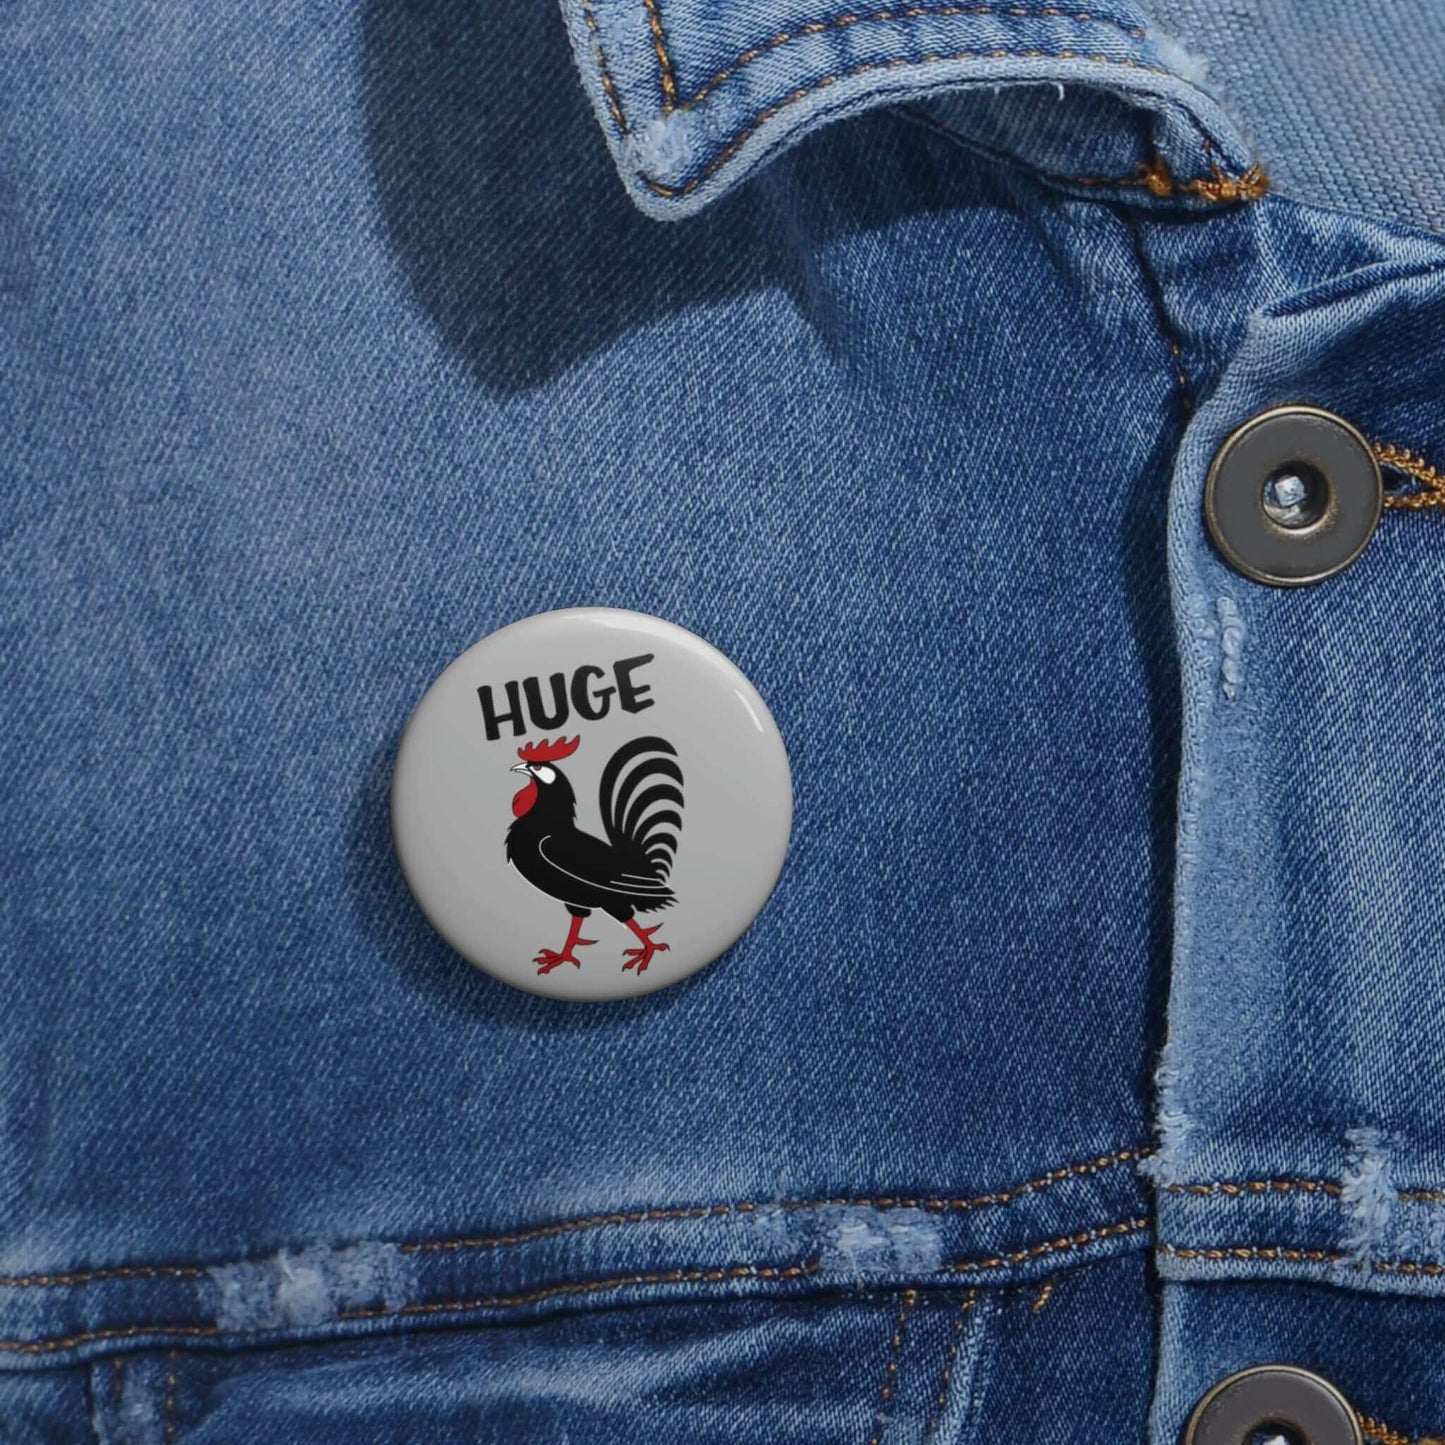 Huge rooster pinback button